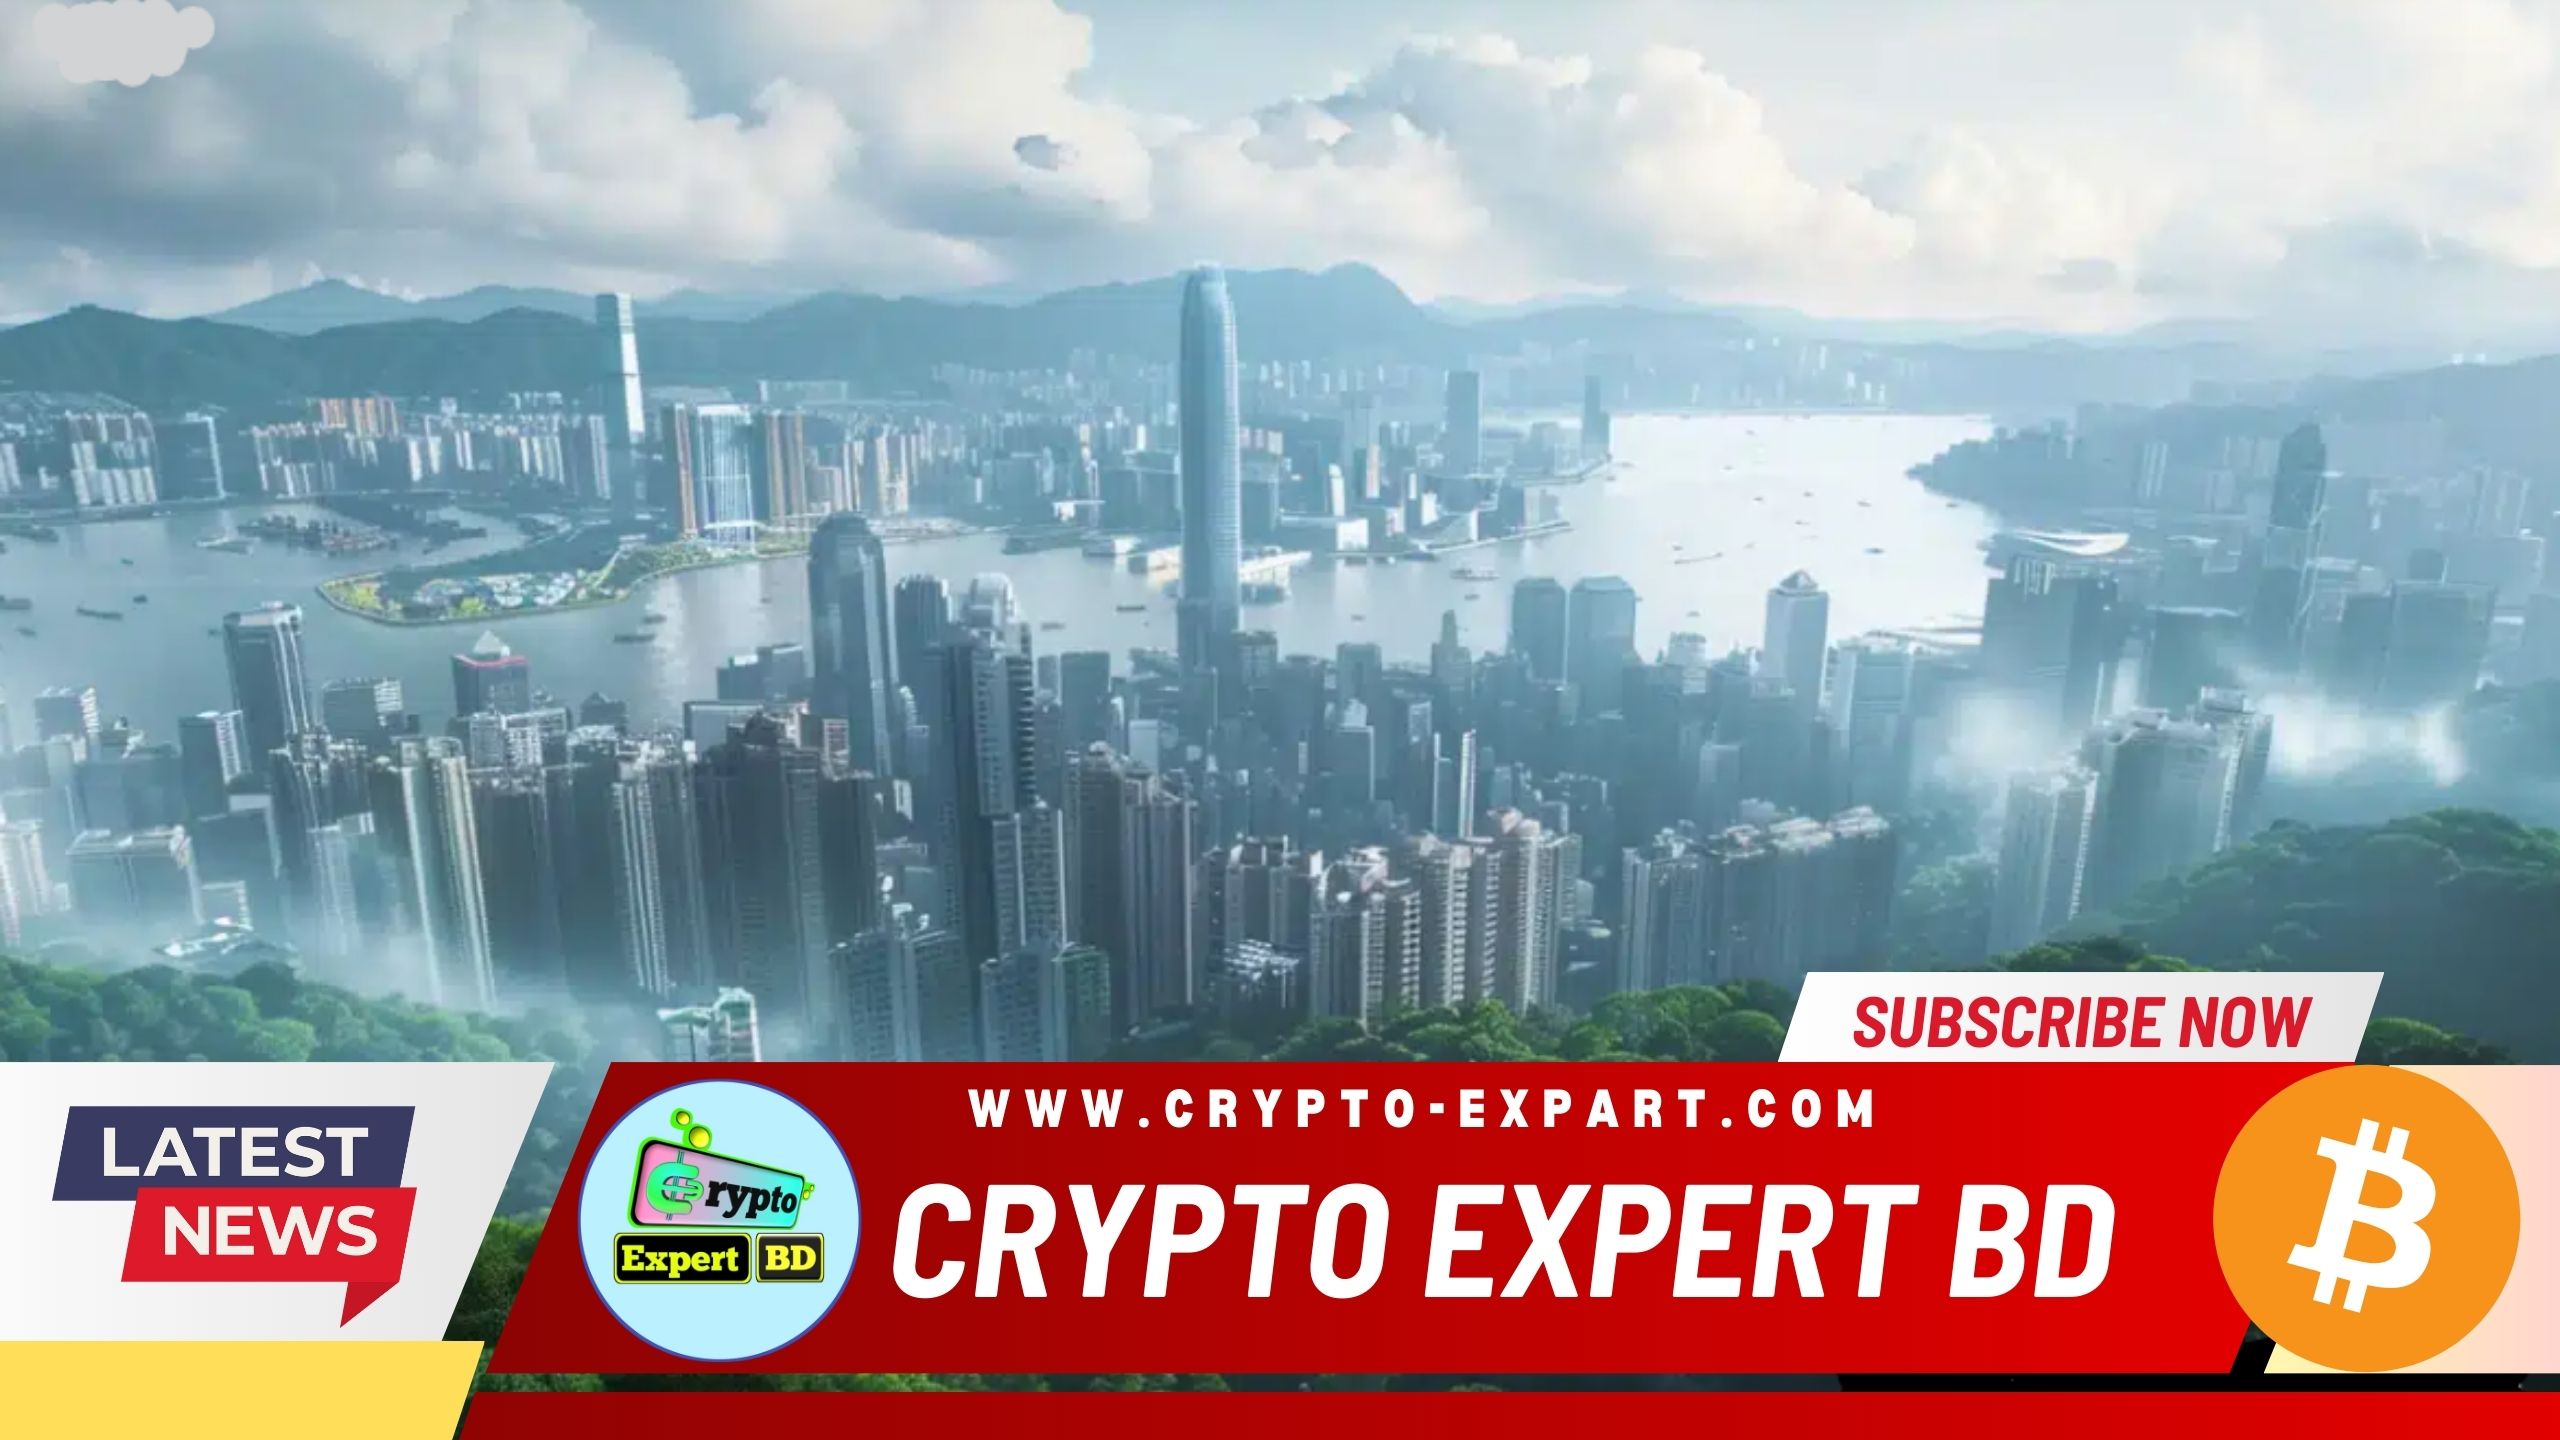 Hong Kong SFC to Conduct Onsite Inspections for Crypto License Applicants